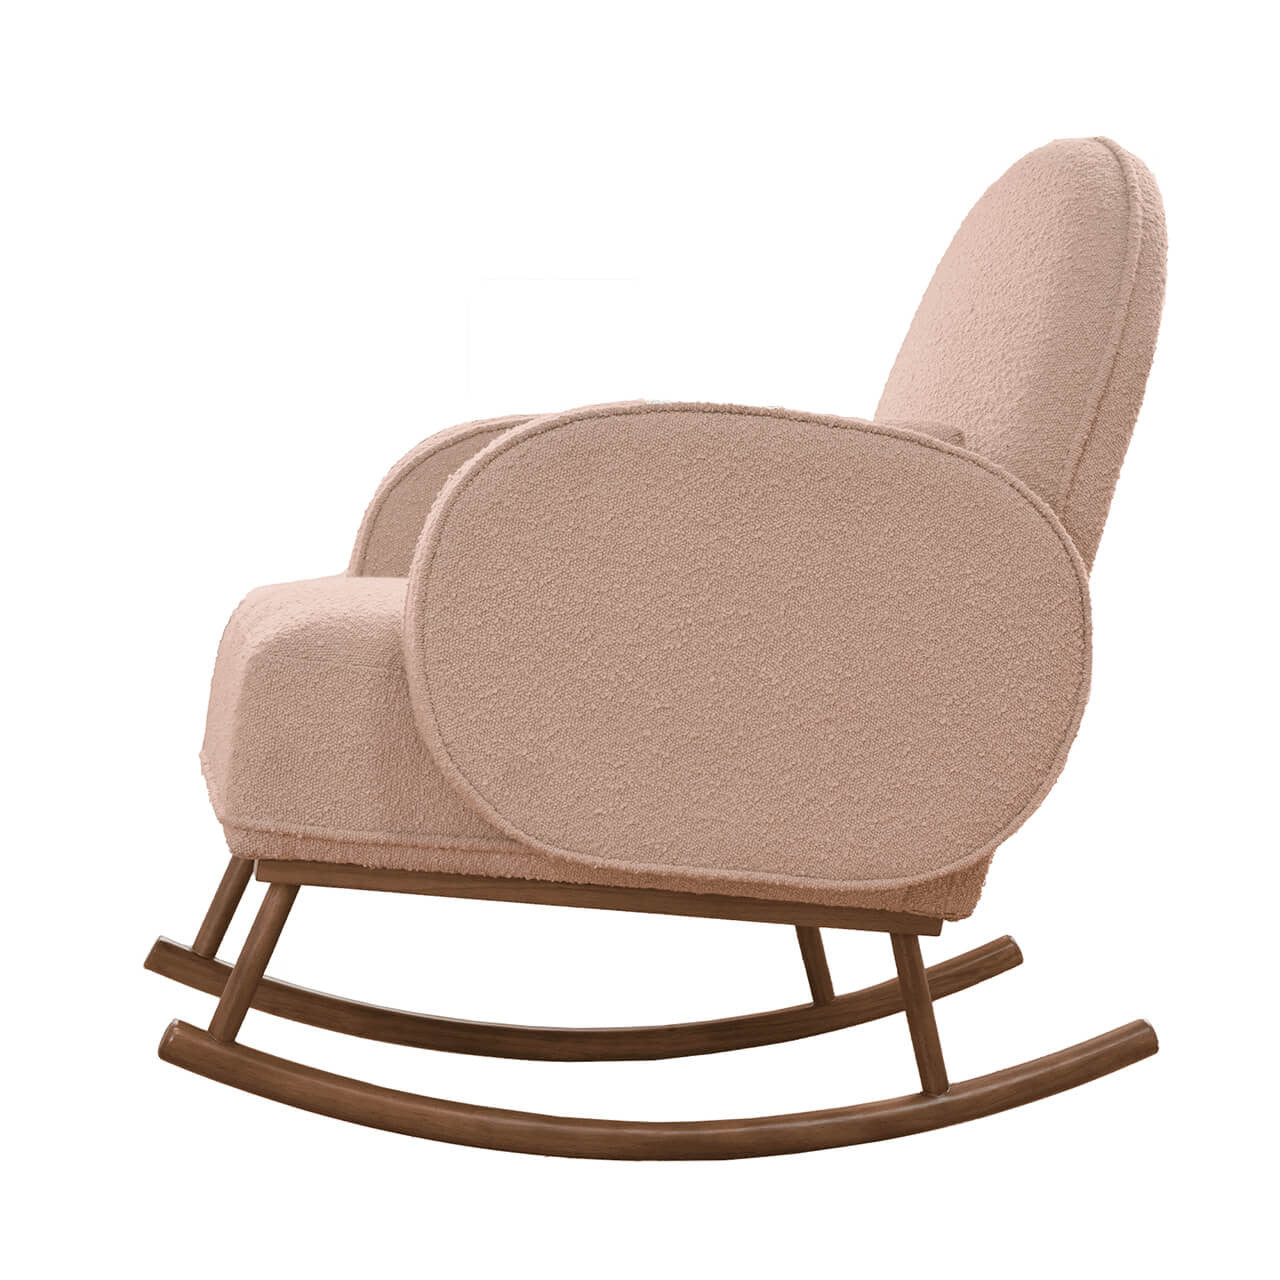 Tutti Bambini Micah Rocking Chair & Footstool- Boucle Blush - For Your Little One